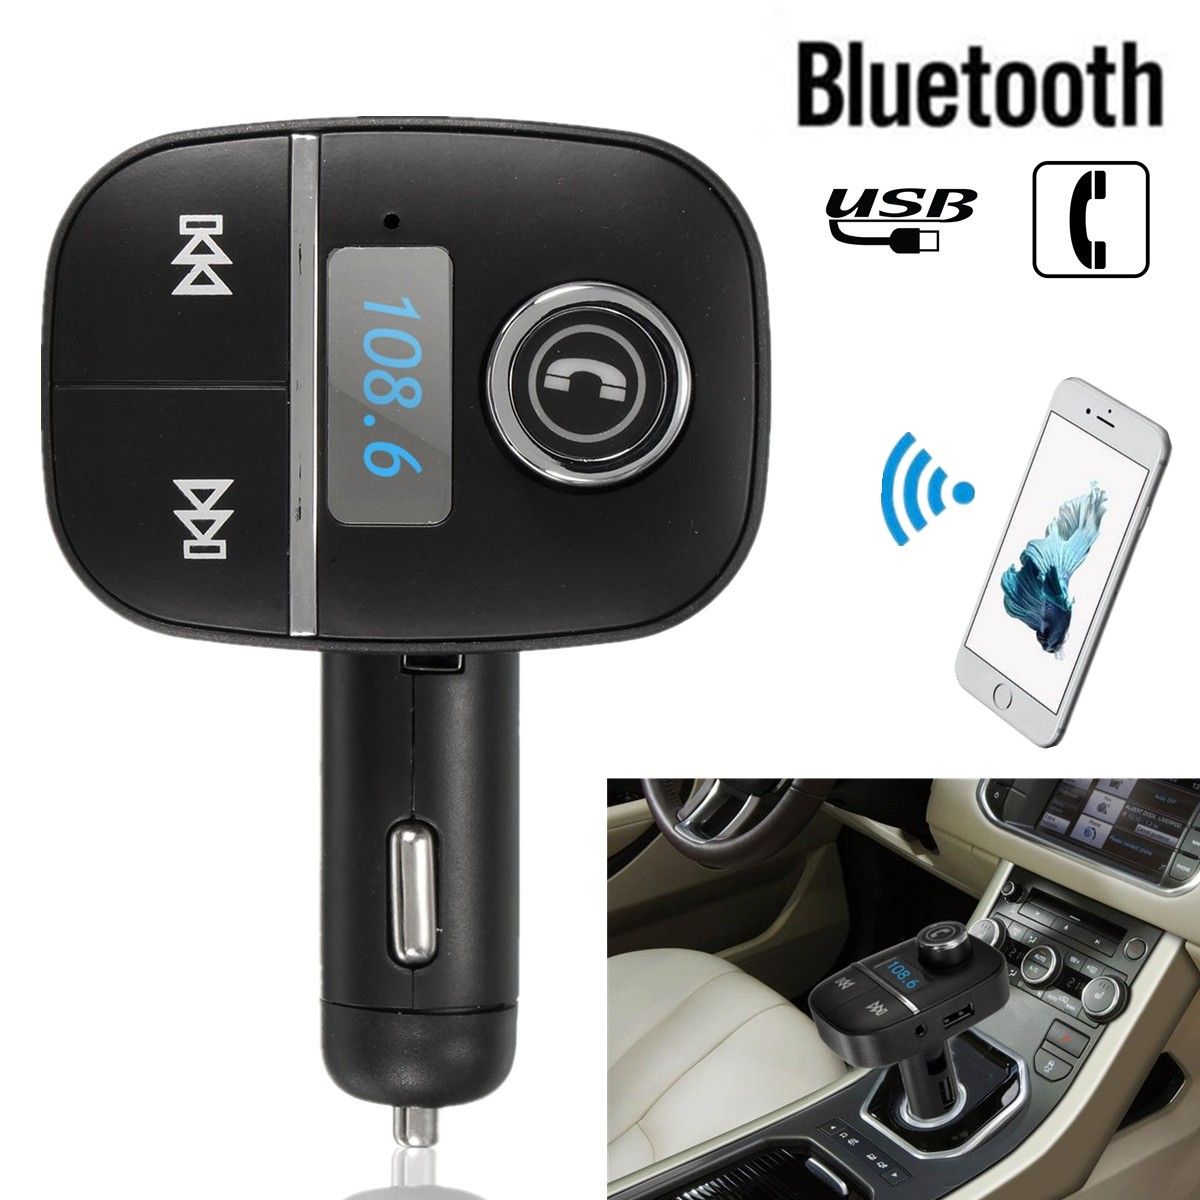 bluetooth-Hands-Free-Kit-Car-FM-Transimittervs-USB-Charger-AUX-MP3-Player-For-phones-1048806